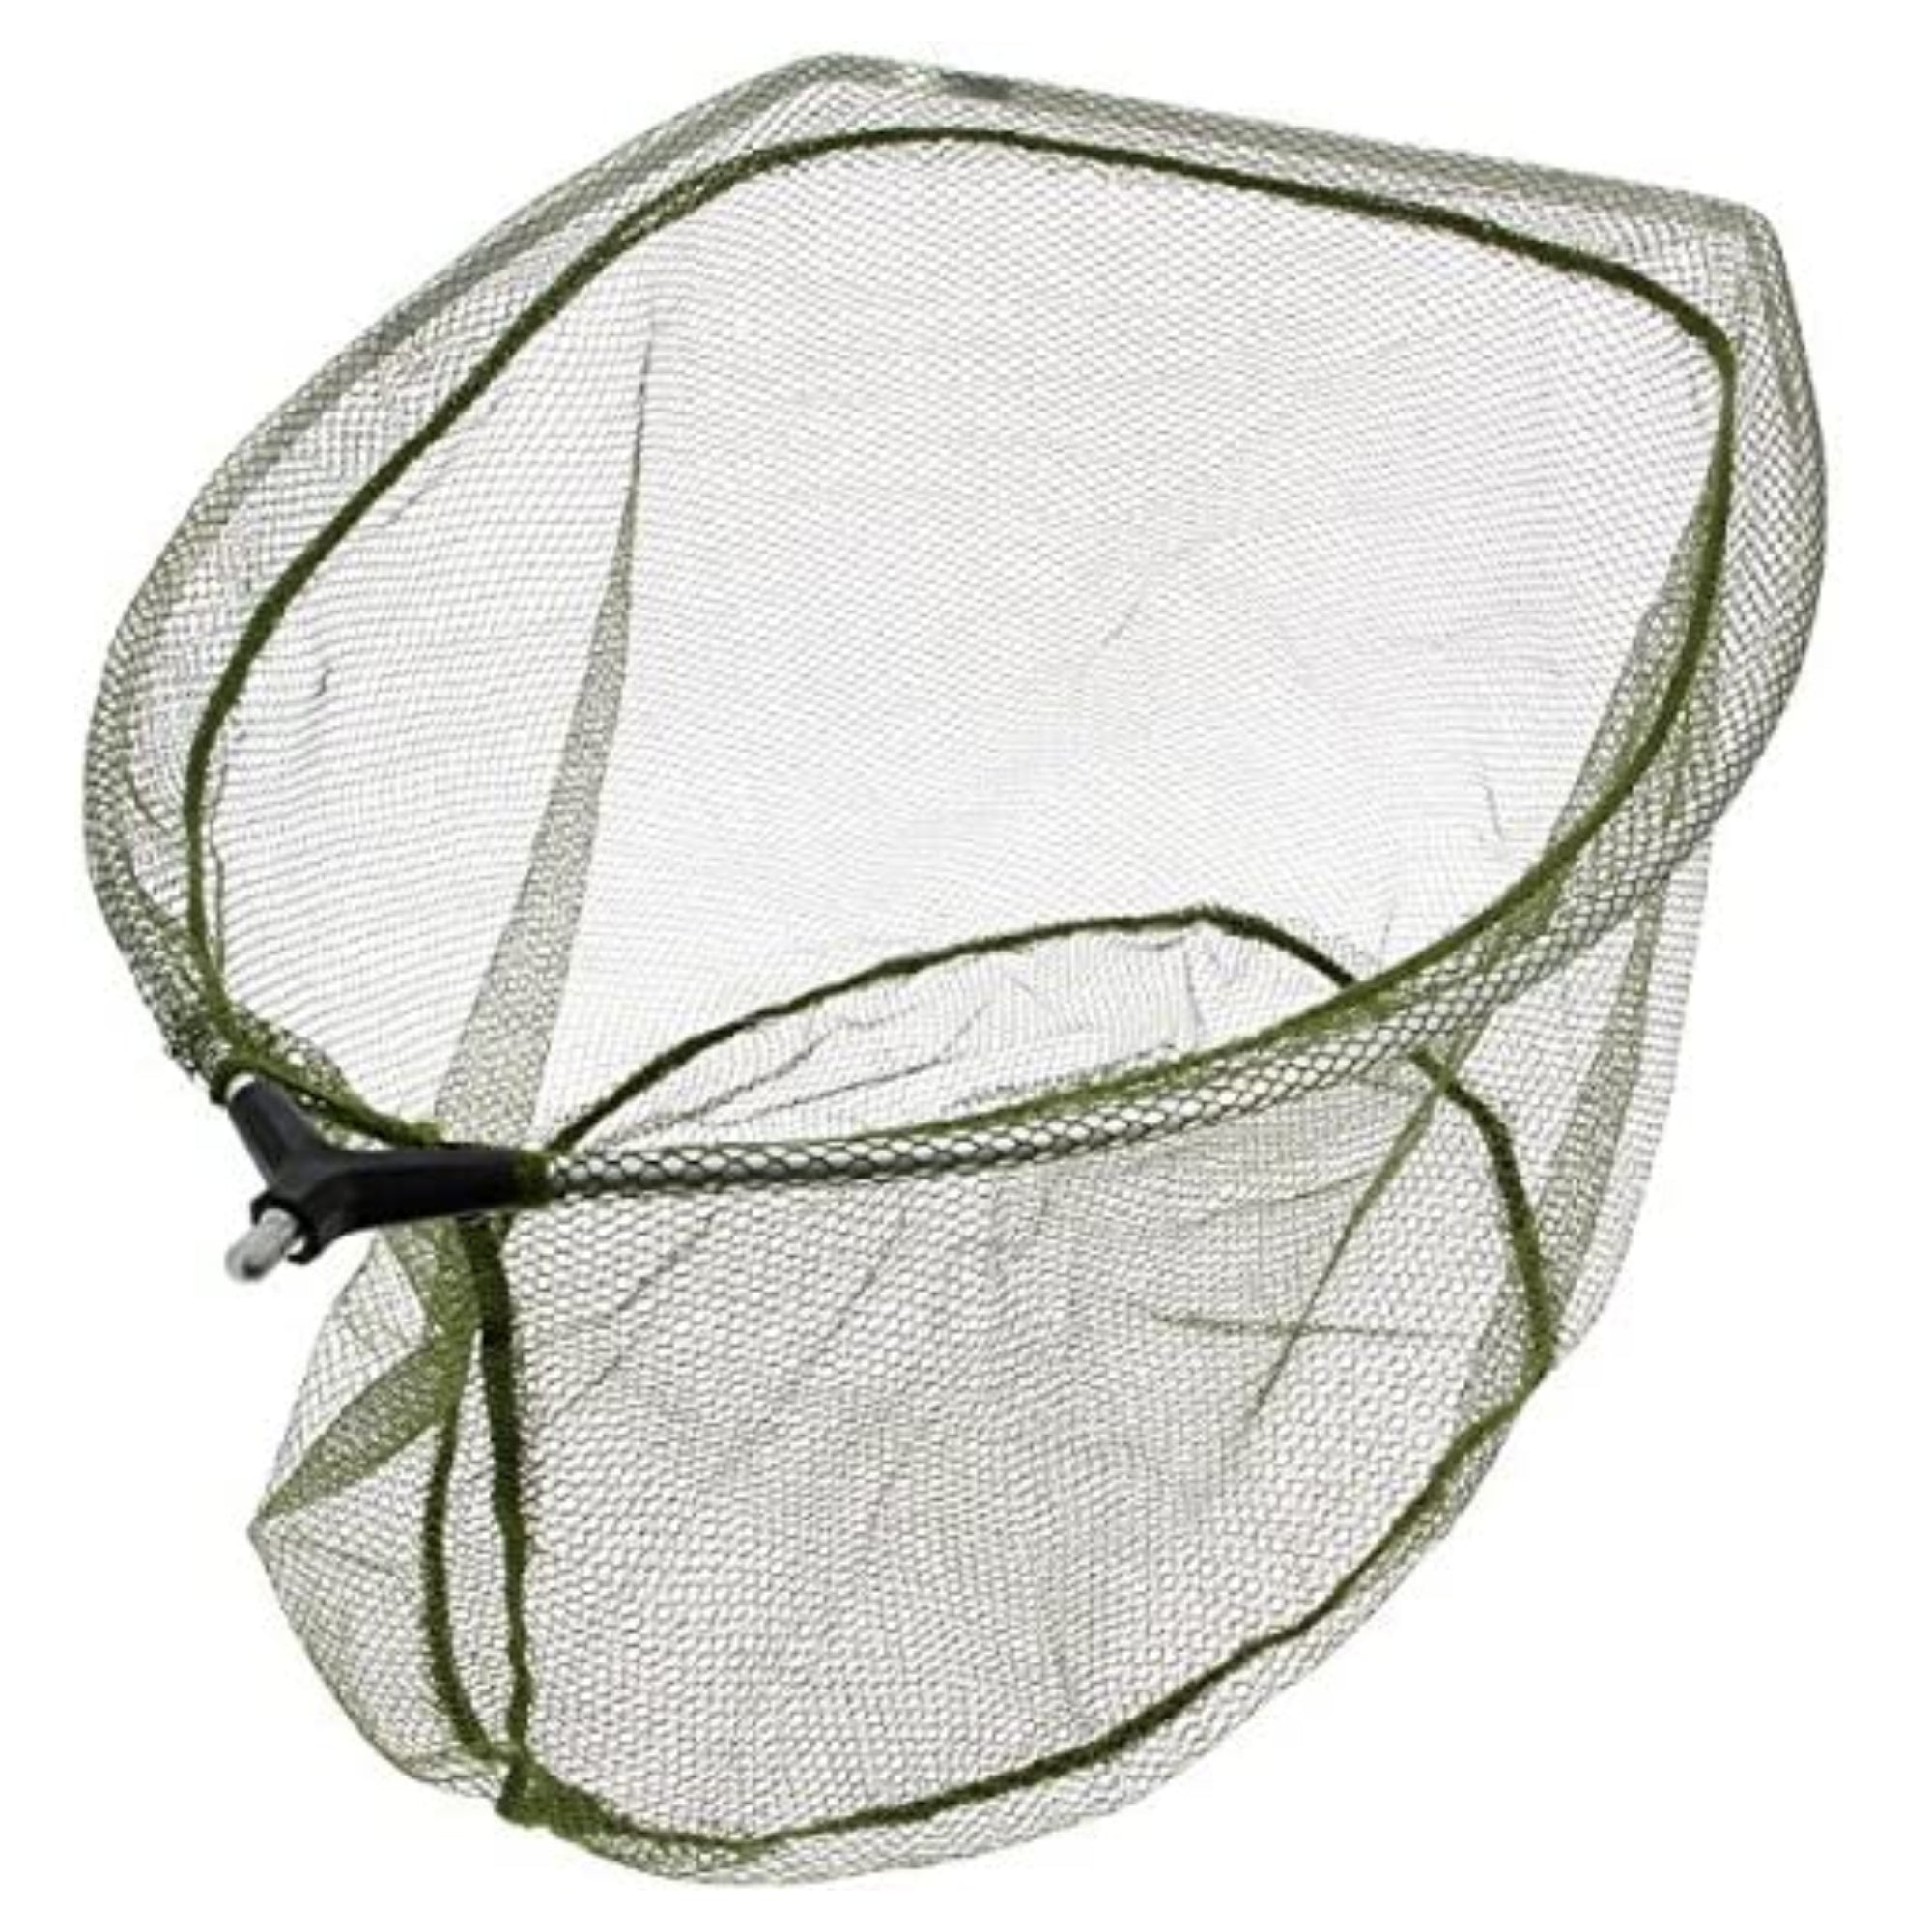 Angling Pursuits Standard Coarse Fishing Net - 60cm Pan Net with Scoop ...